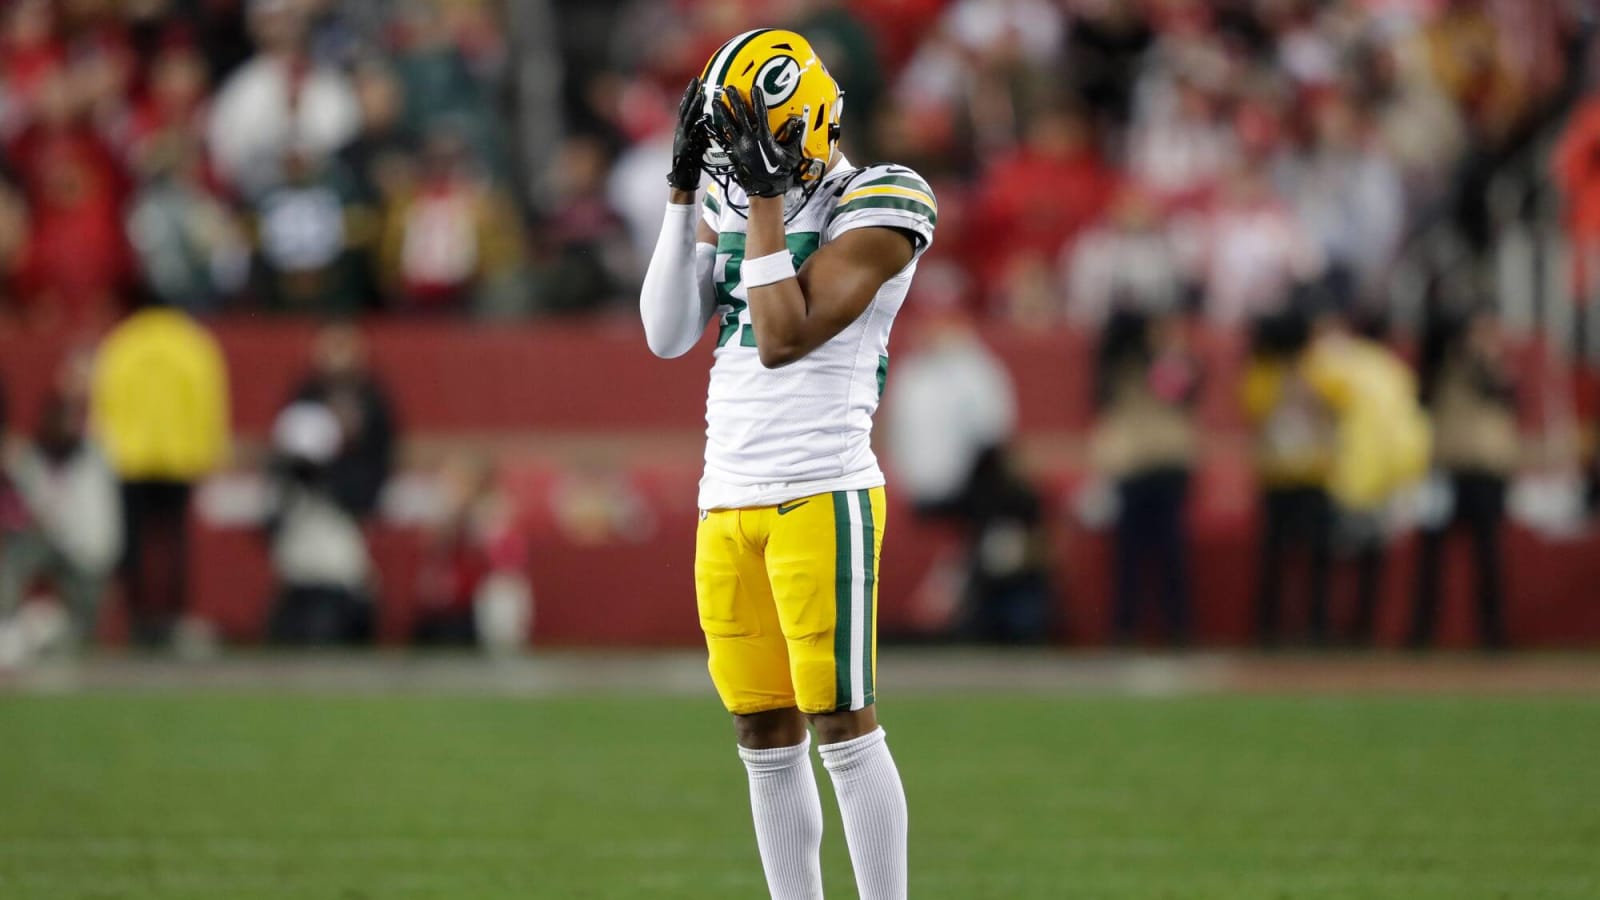 Packers Opinion: Make Apologies as Loud as Your Disrespect